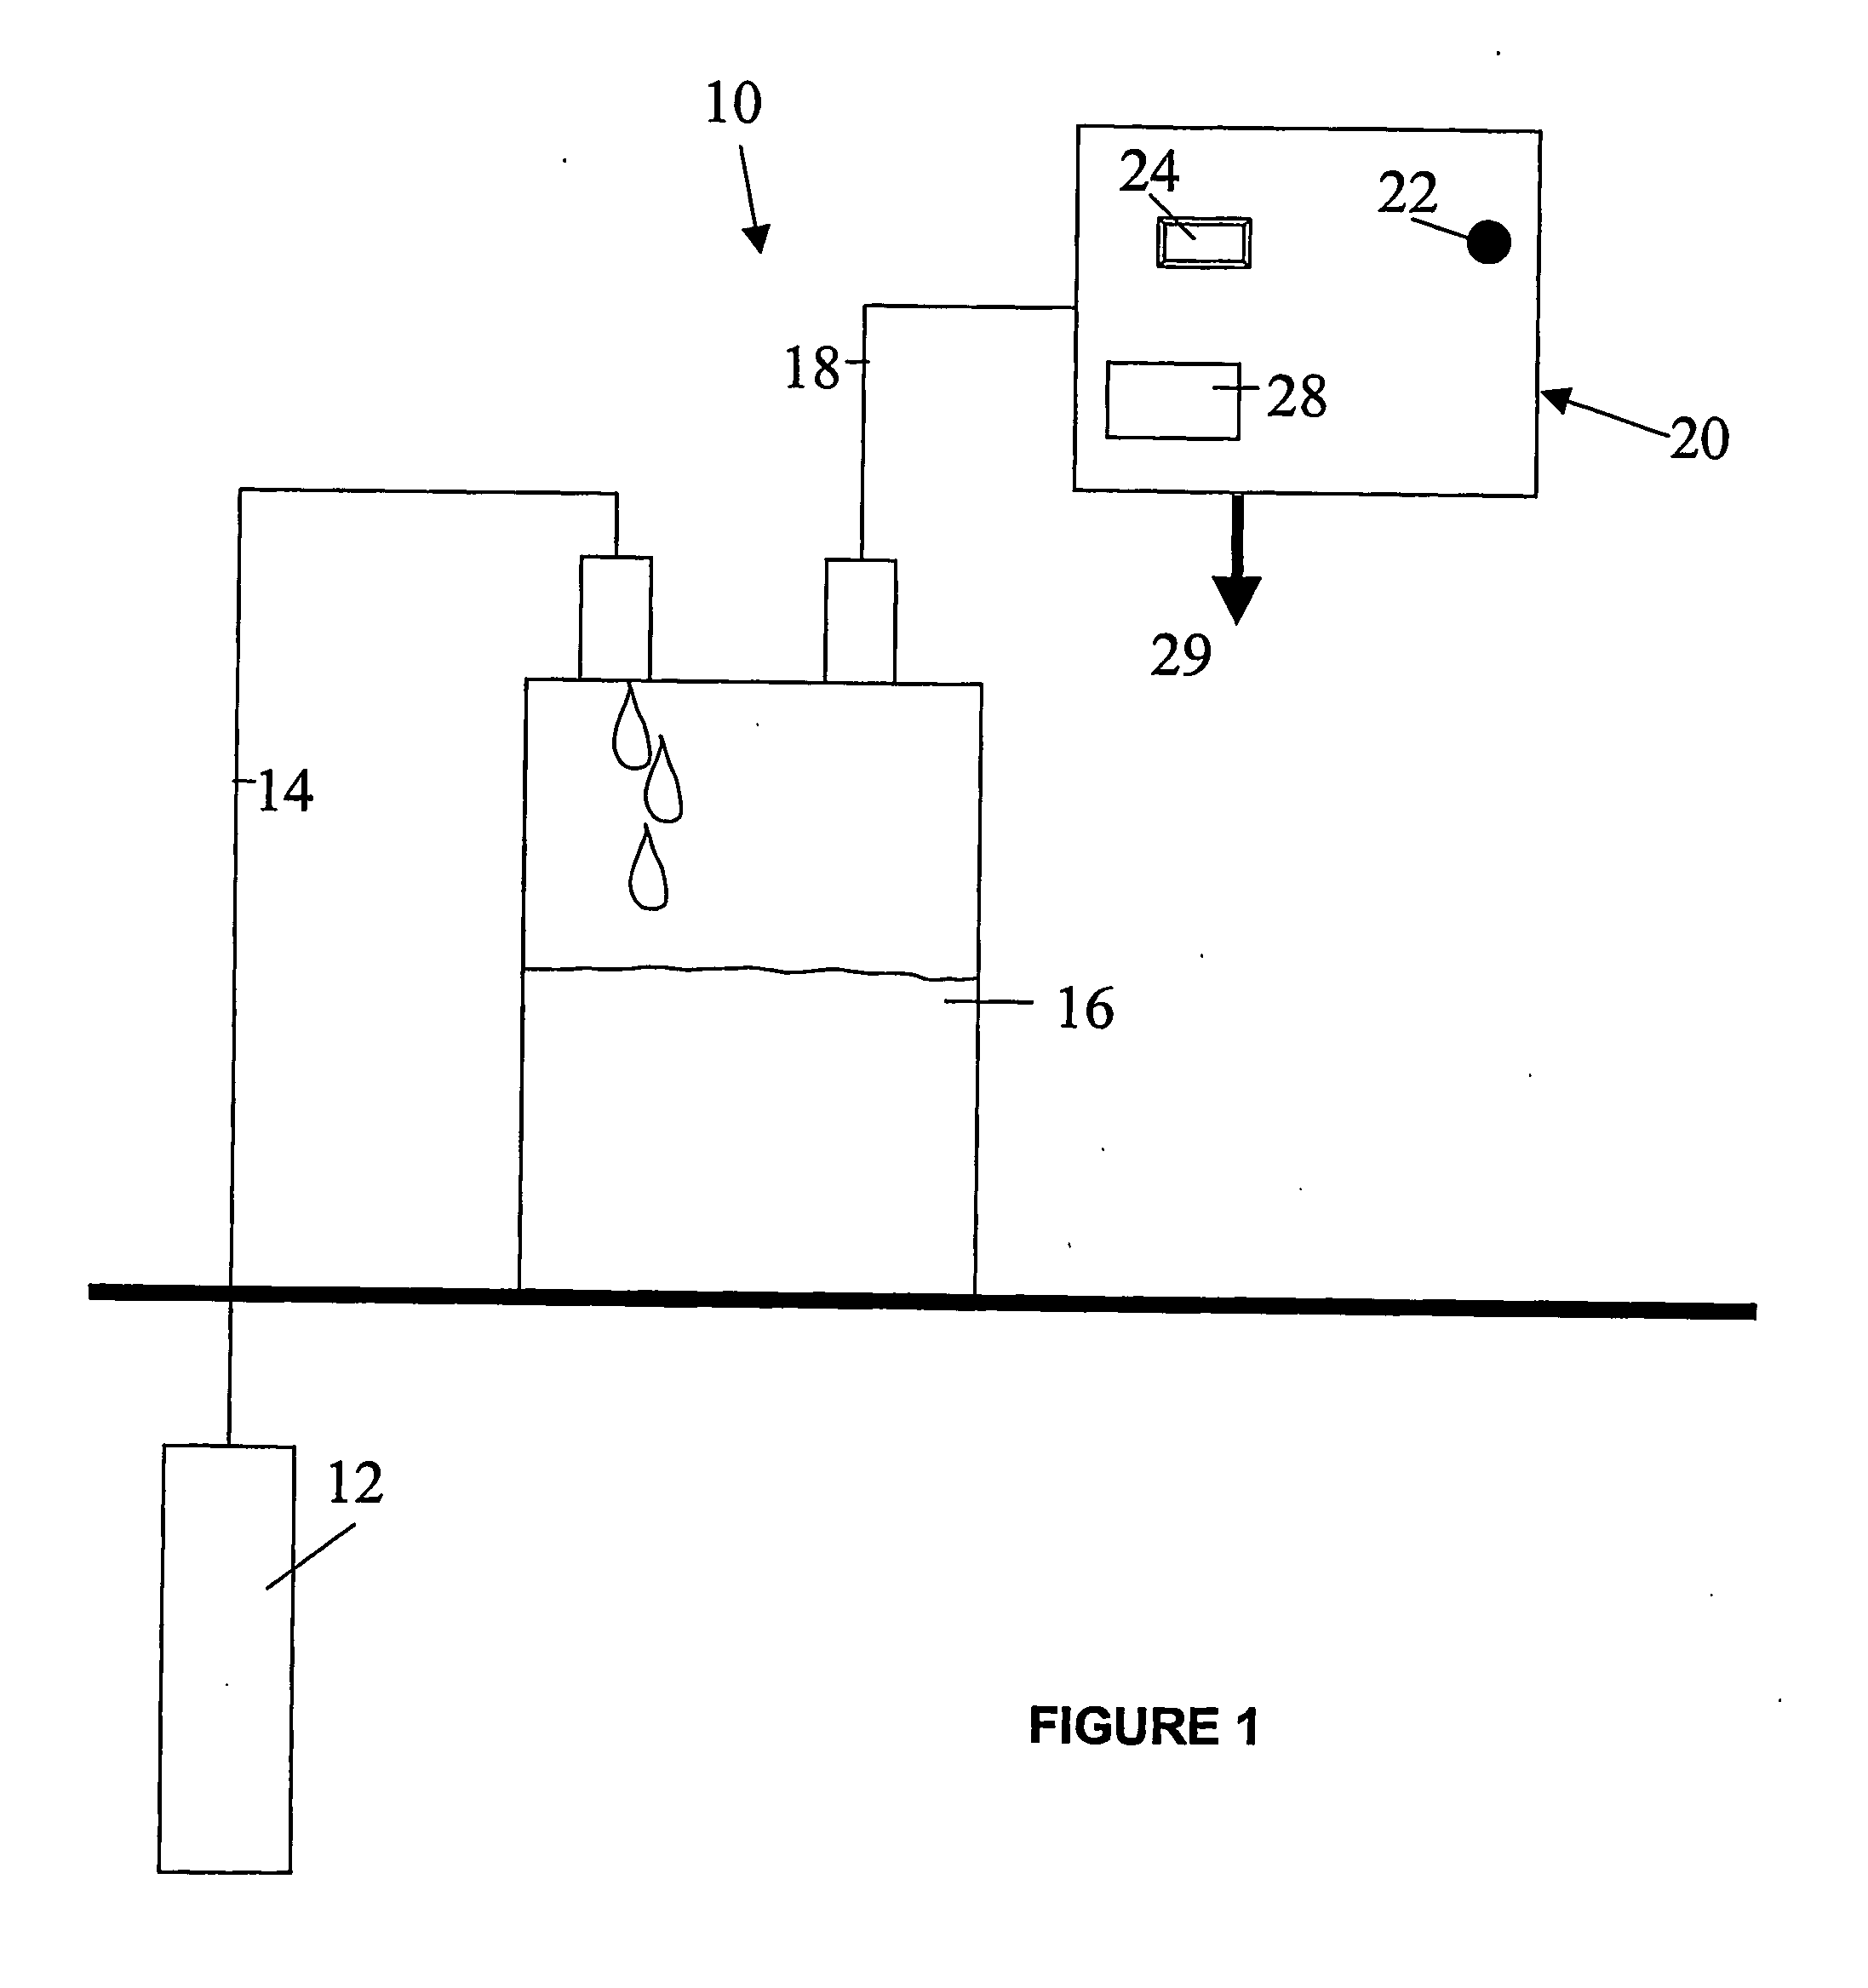 Apparatus and method for collecting soil solution samples